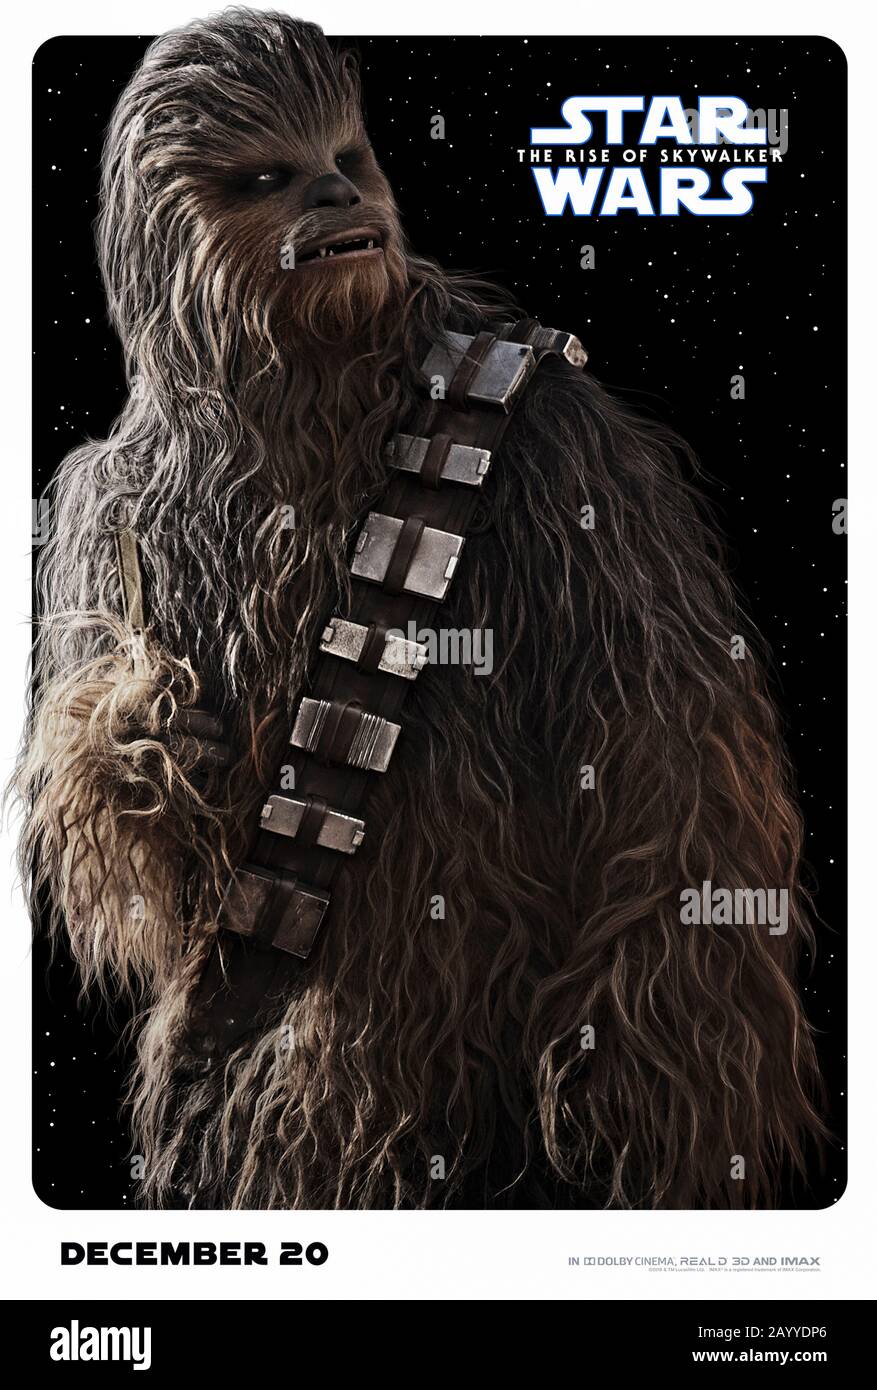 Star Wars: The Rise of Skywalker (2019) directed by J.J. Abrams and starring Joonas Suotamo as Chewbacca in the final chapter of the Skywalker trilogy. Stock Photo